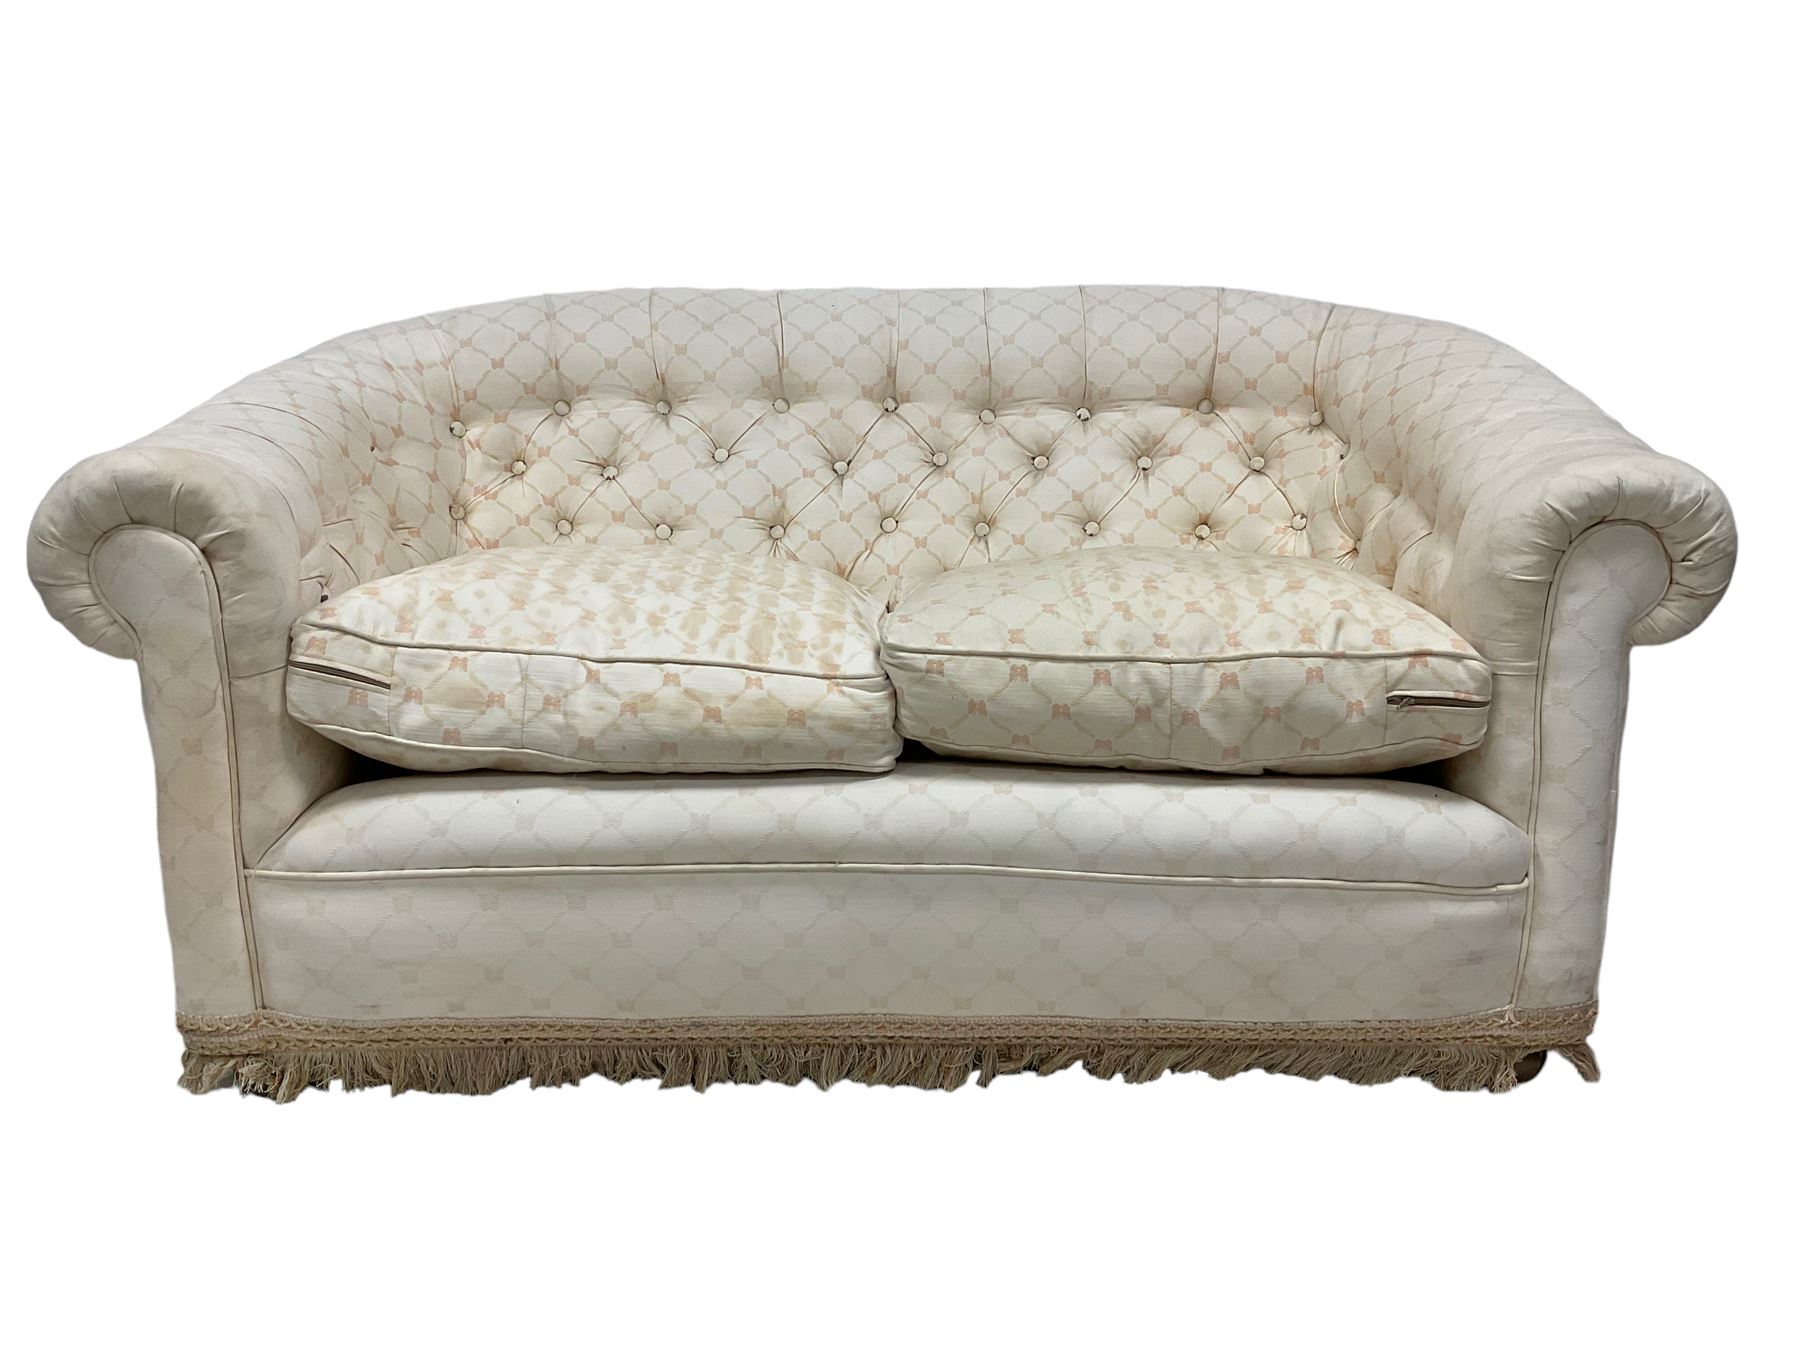 Pair chesterfield design two seat sofas - Image 3 of 8